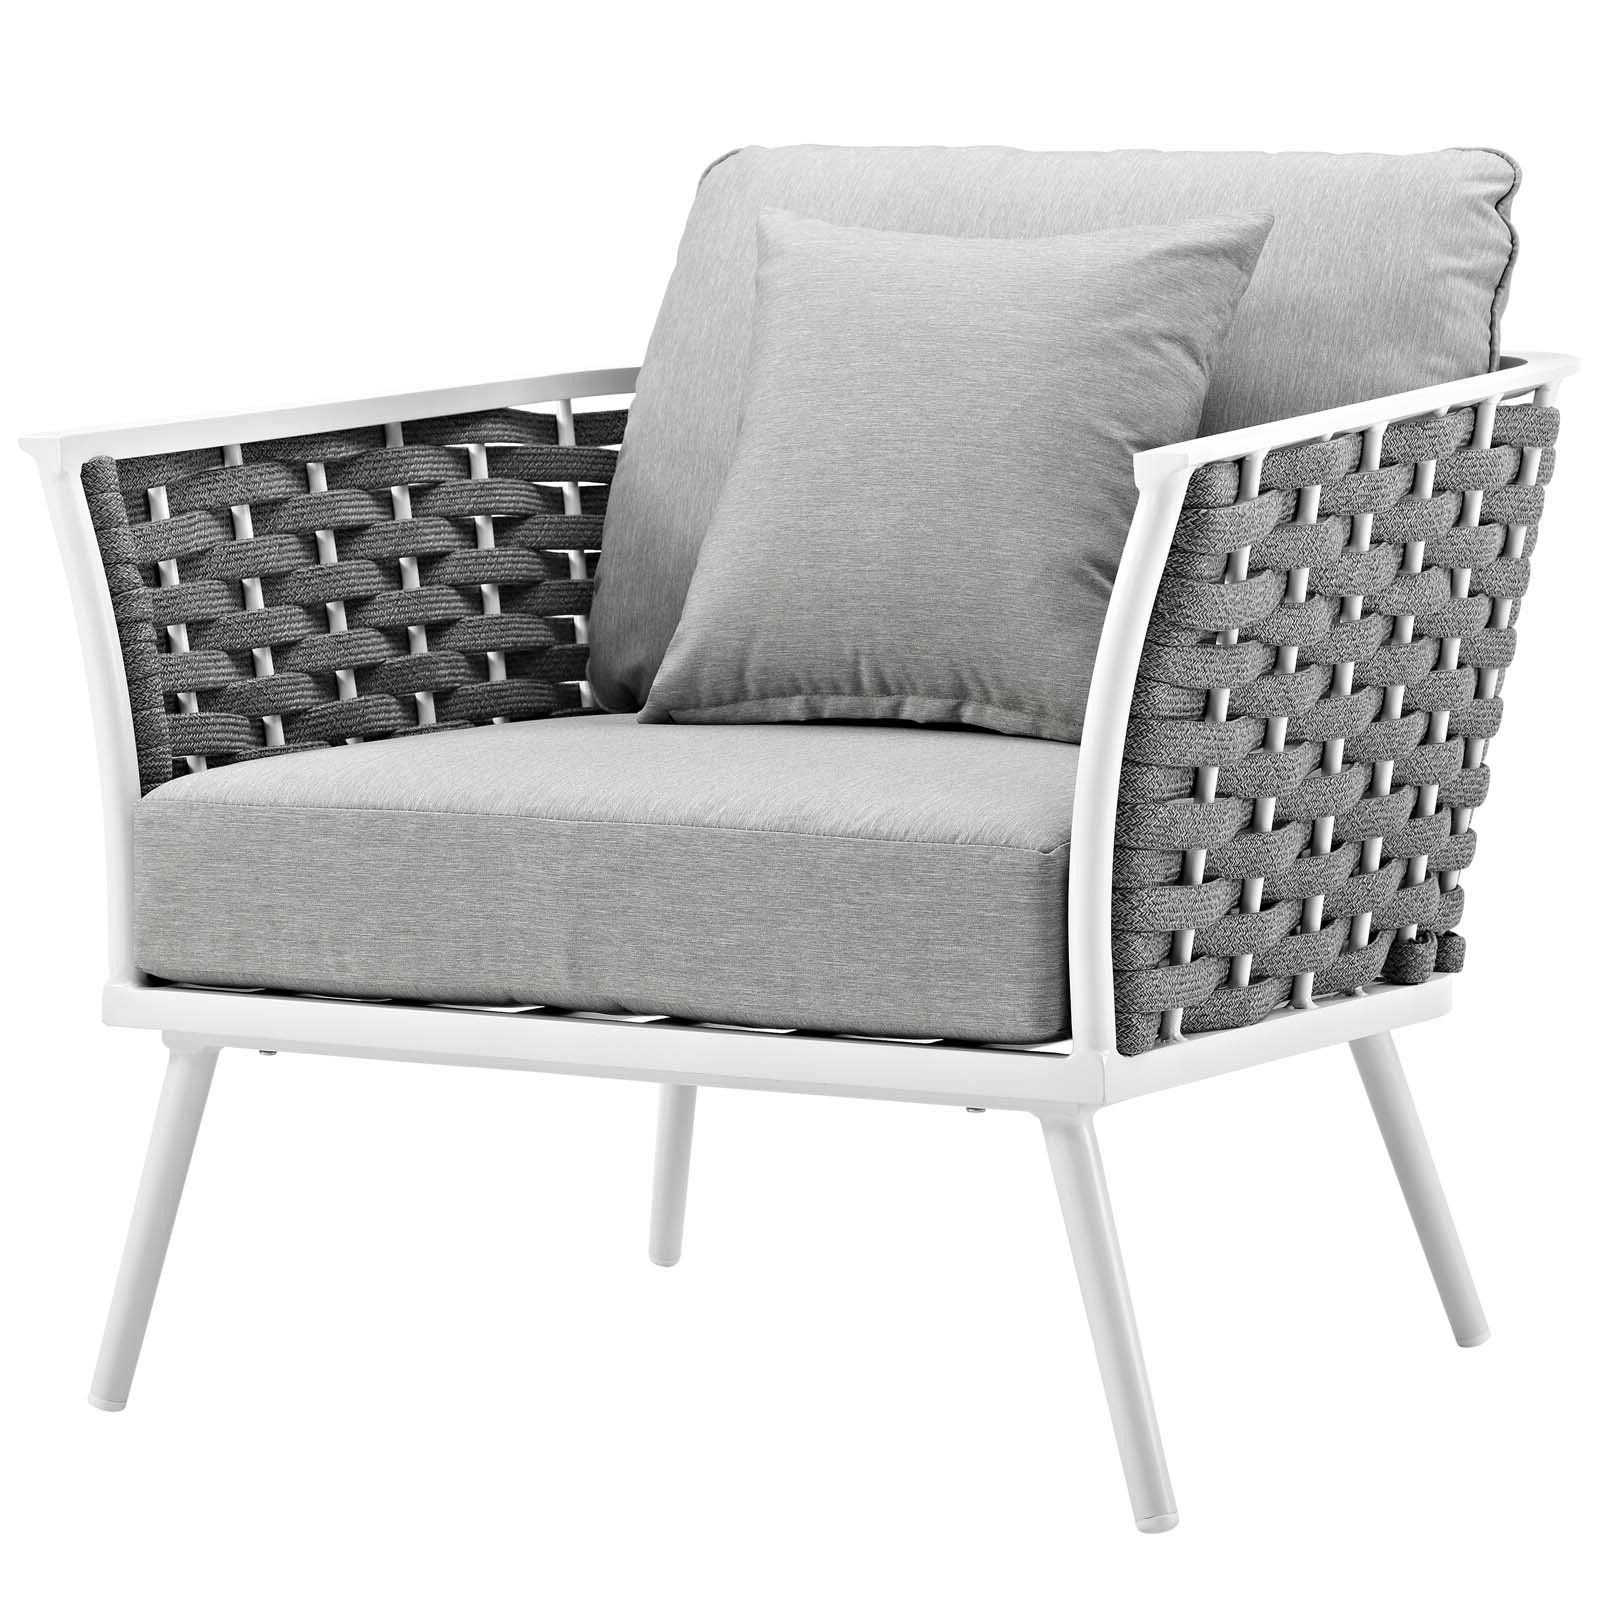 Well Known Rossville Patio Chair With Cushions With Rossville Outdoor Patio Sofas With Cushions (View 8 of 25)